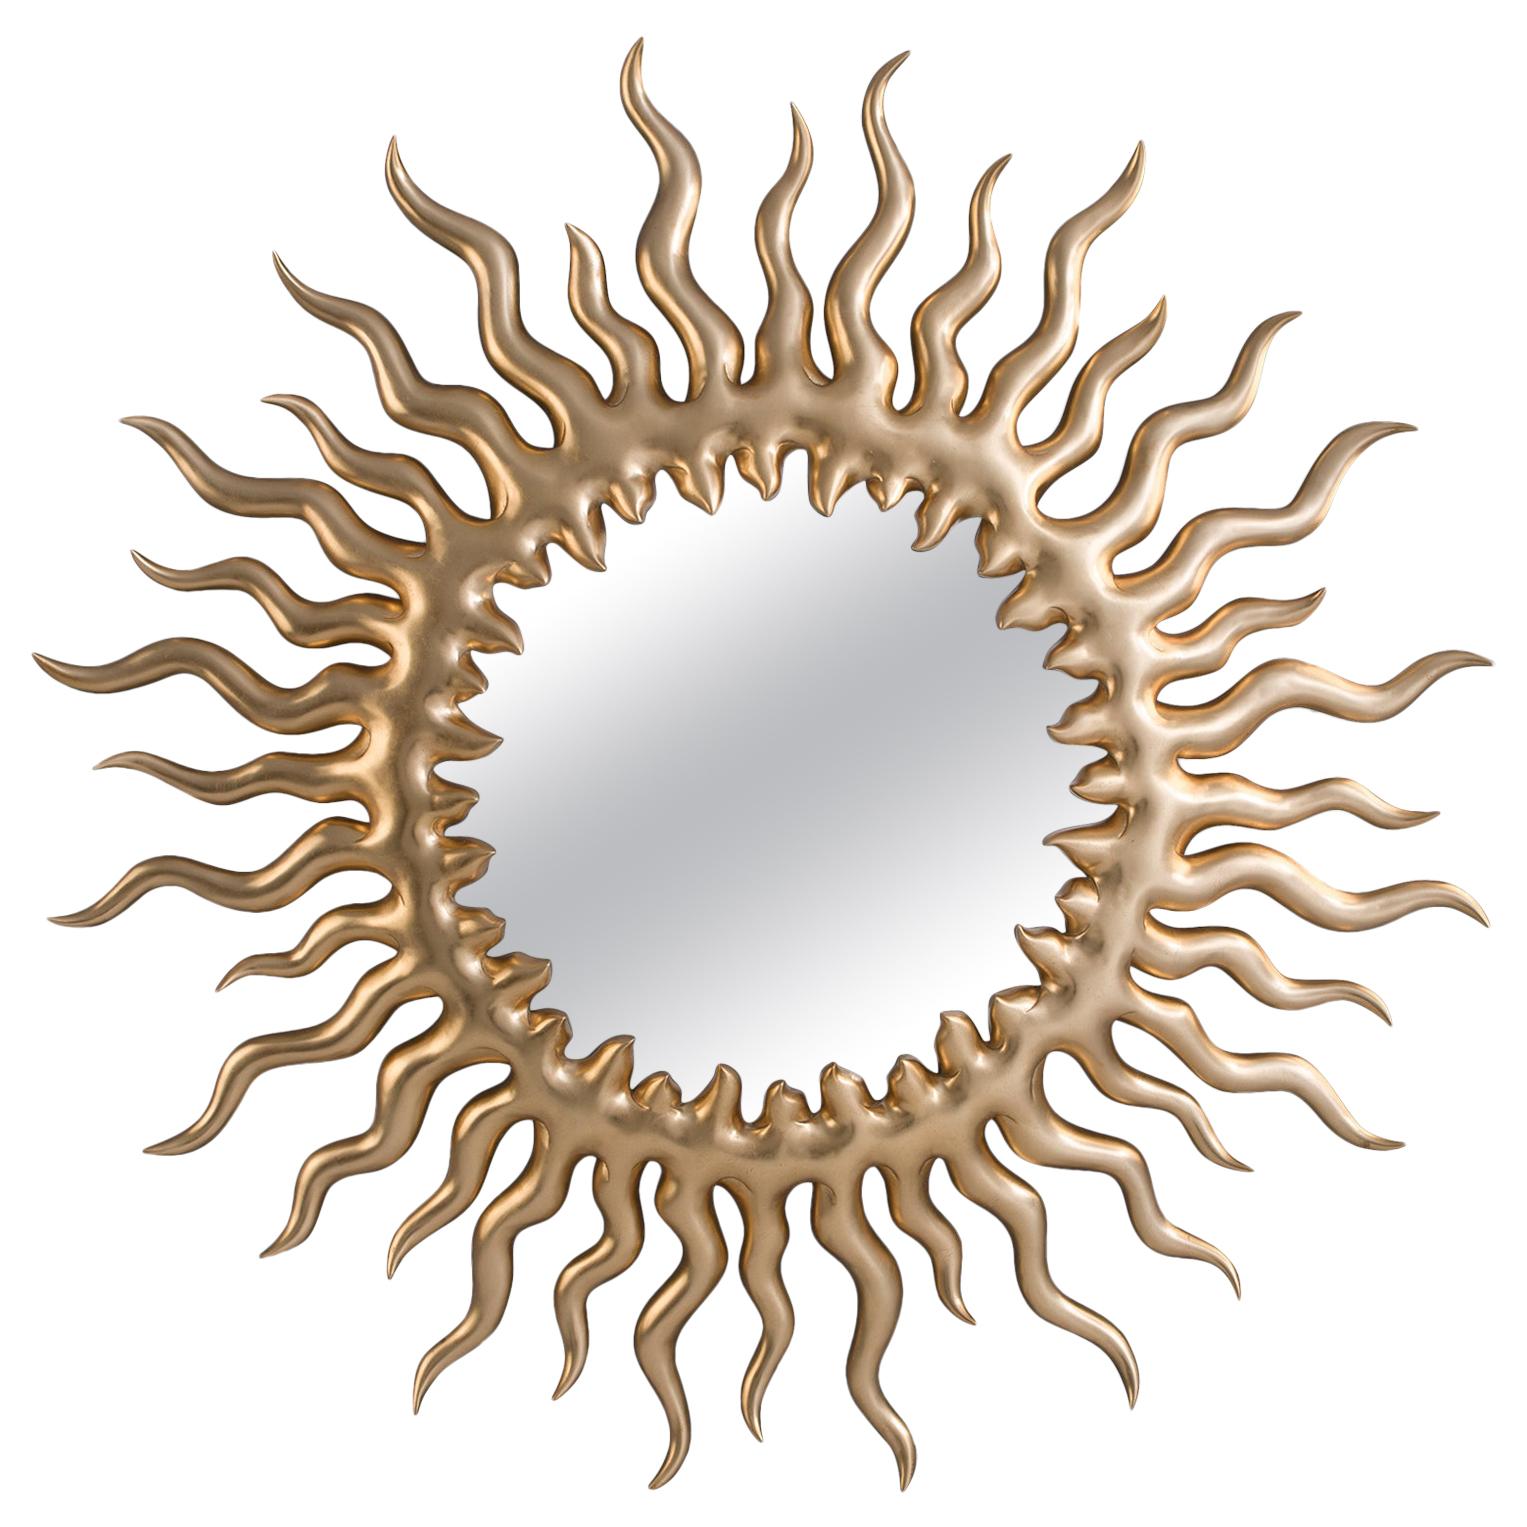 Melting Sun Mirror with Gold Paint